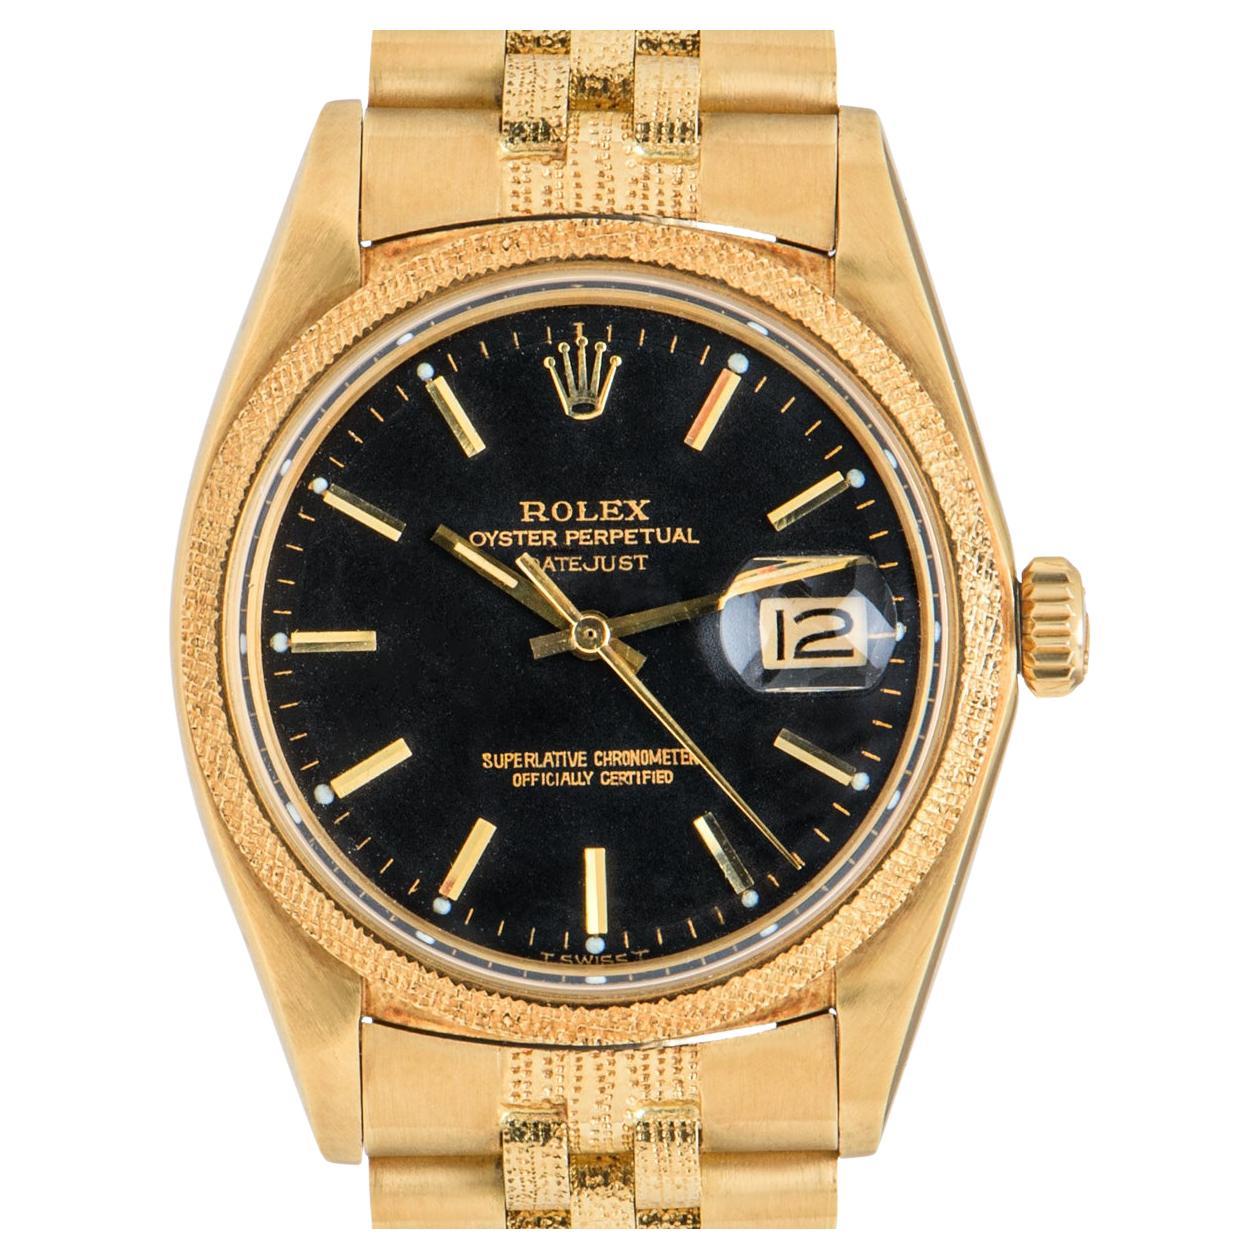 A 36mm NOS Datejust in yellow gold by Rolex. Featuring a matt black dial with applied hour markers and a fixed yellow gold bezel with a florentine finish. Equipped with an 18k yellow gold jubilee bracelet which features a florentine finish in the